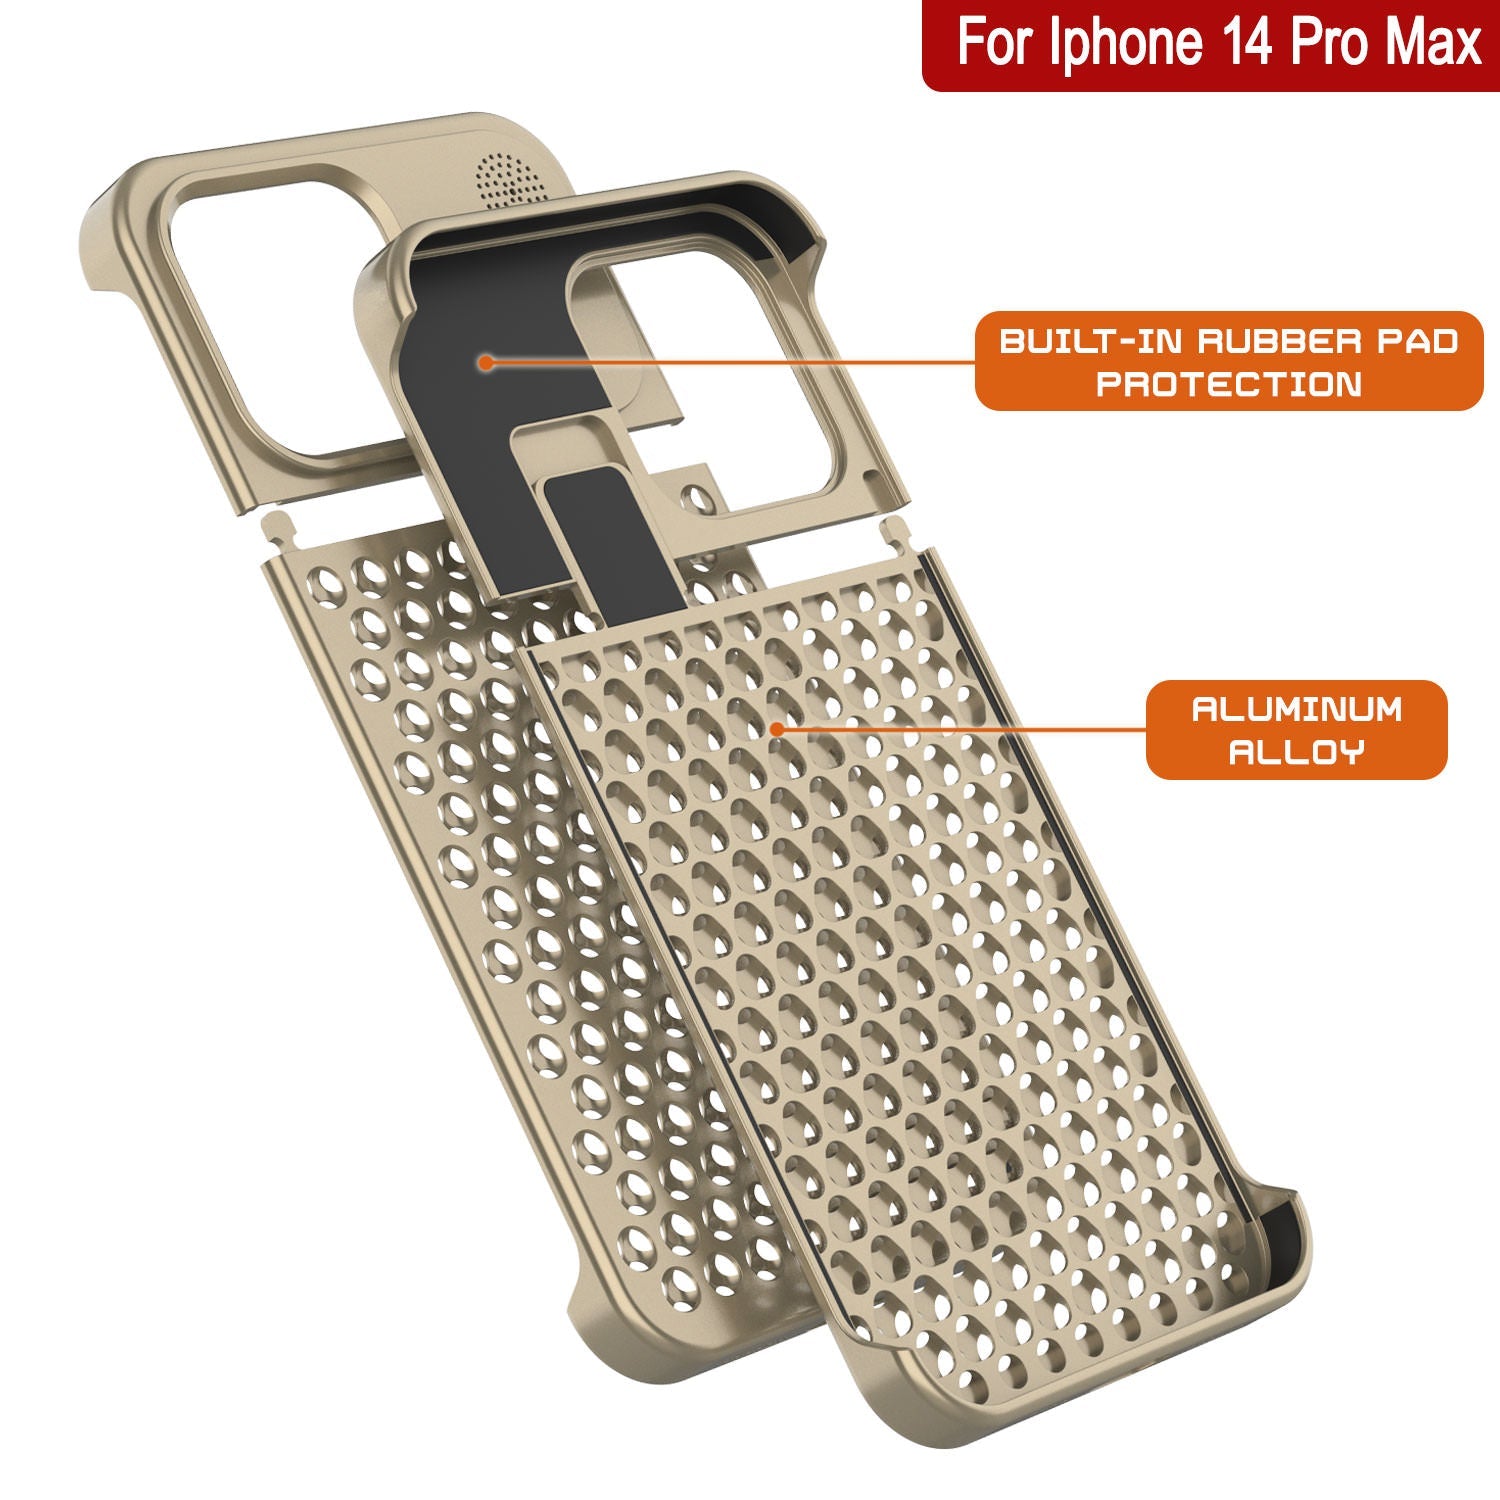 PunkCase for iPhone 14 Pro Max Aluminum Alloy Case [Fortifier Extreme Series] Ultra Durable Cover [Gold]